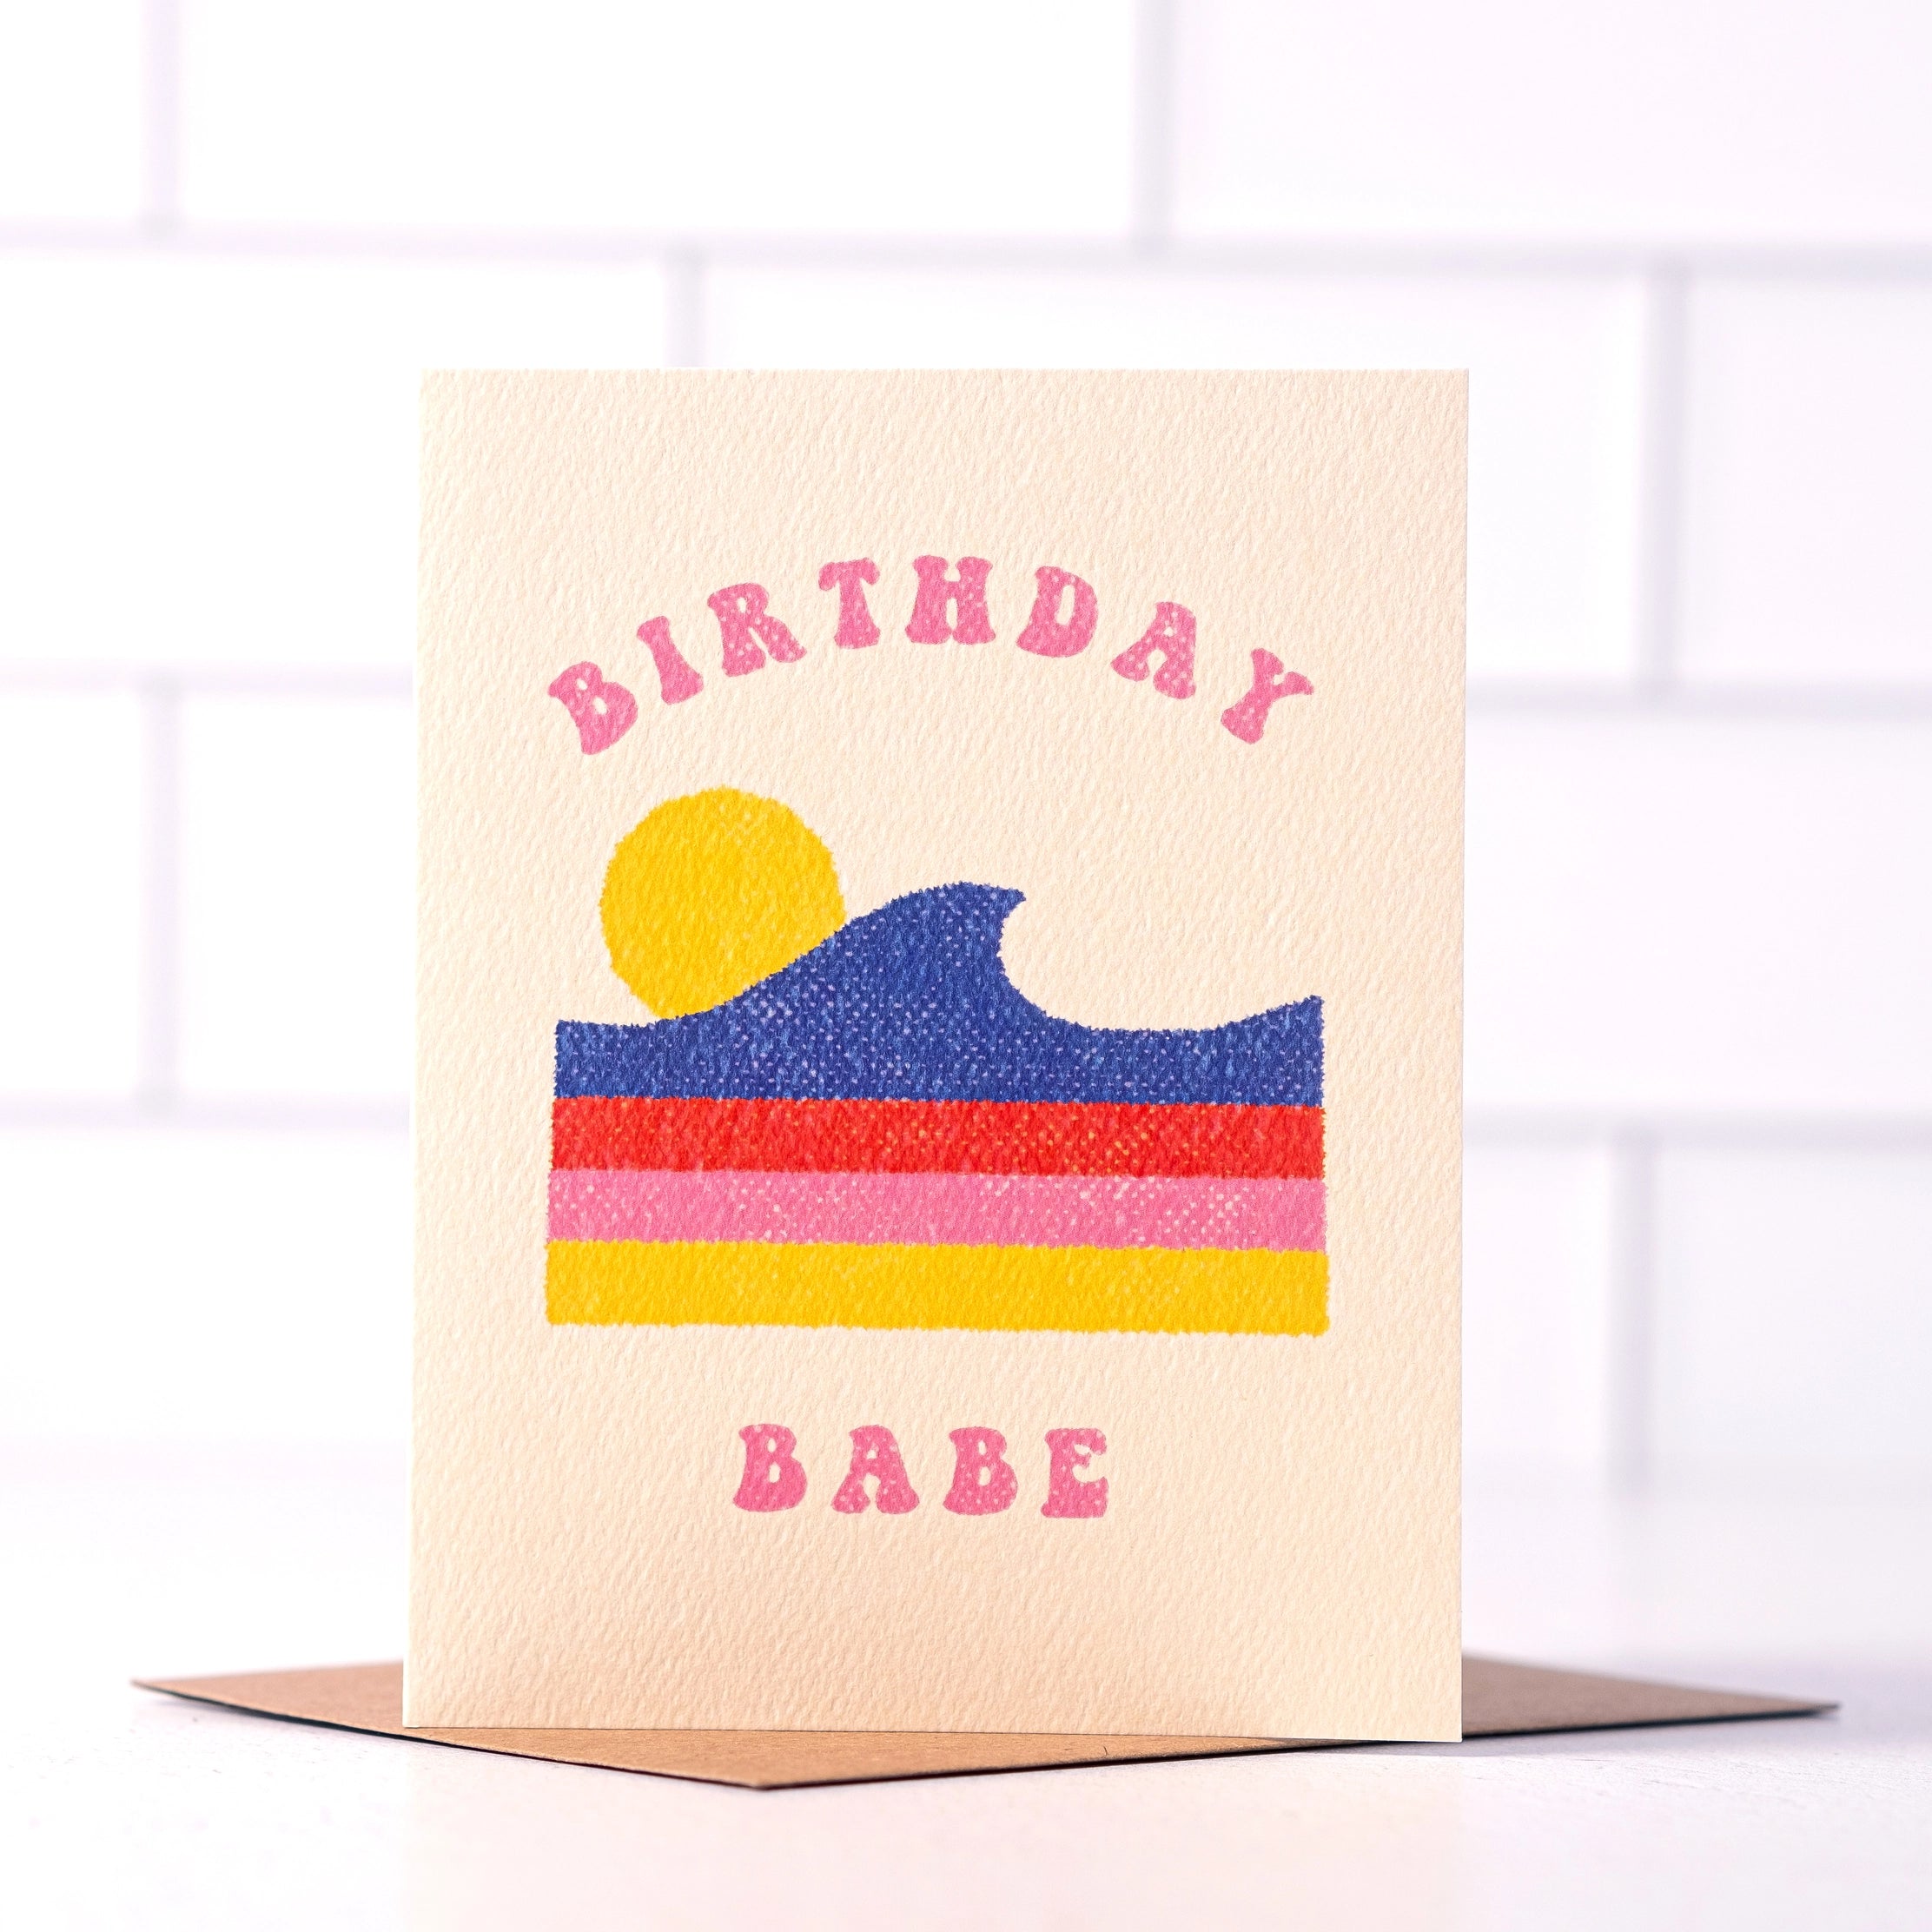 A simple, summer birthday card. Featuring a retro surf graphic and seventies font. This card is quickly becoming one of our best-sellers.